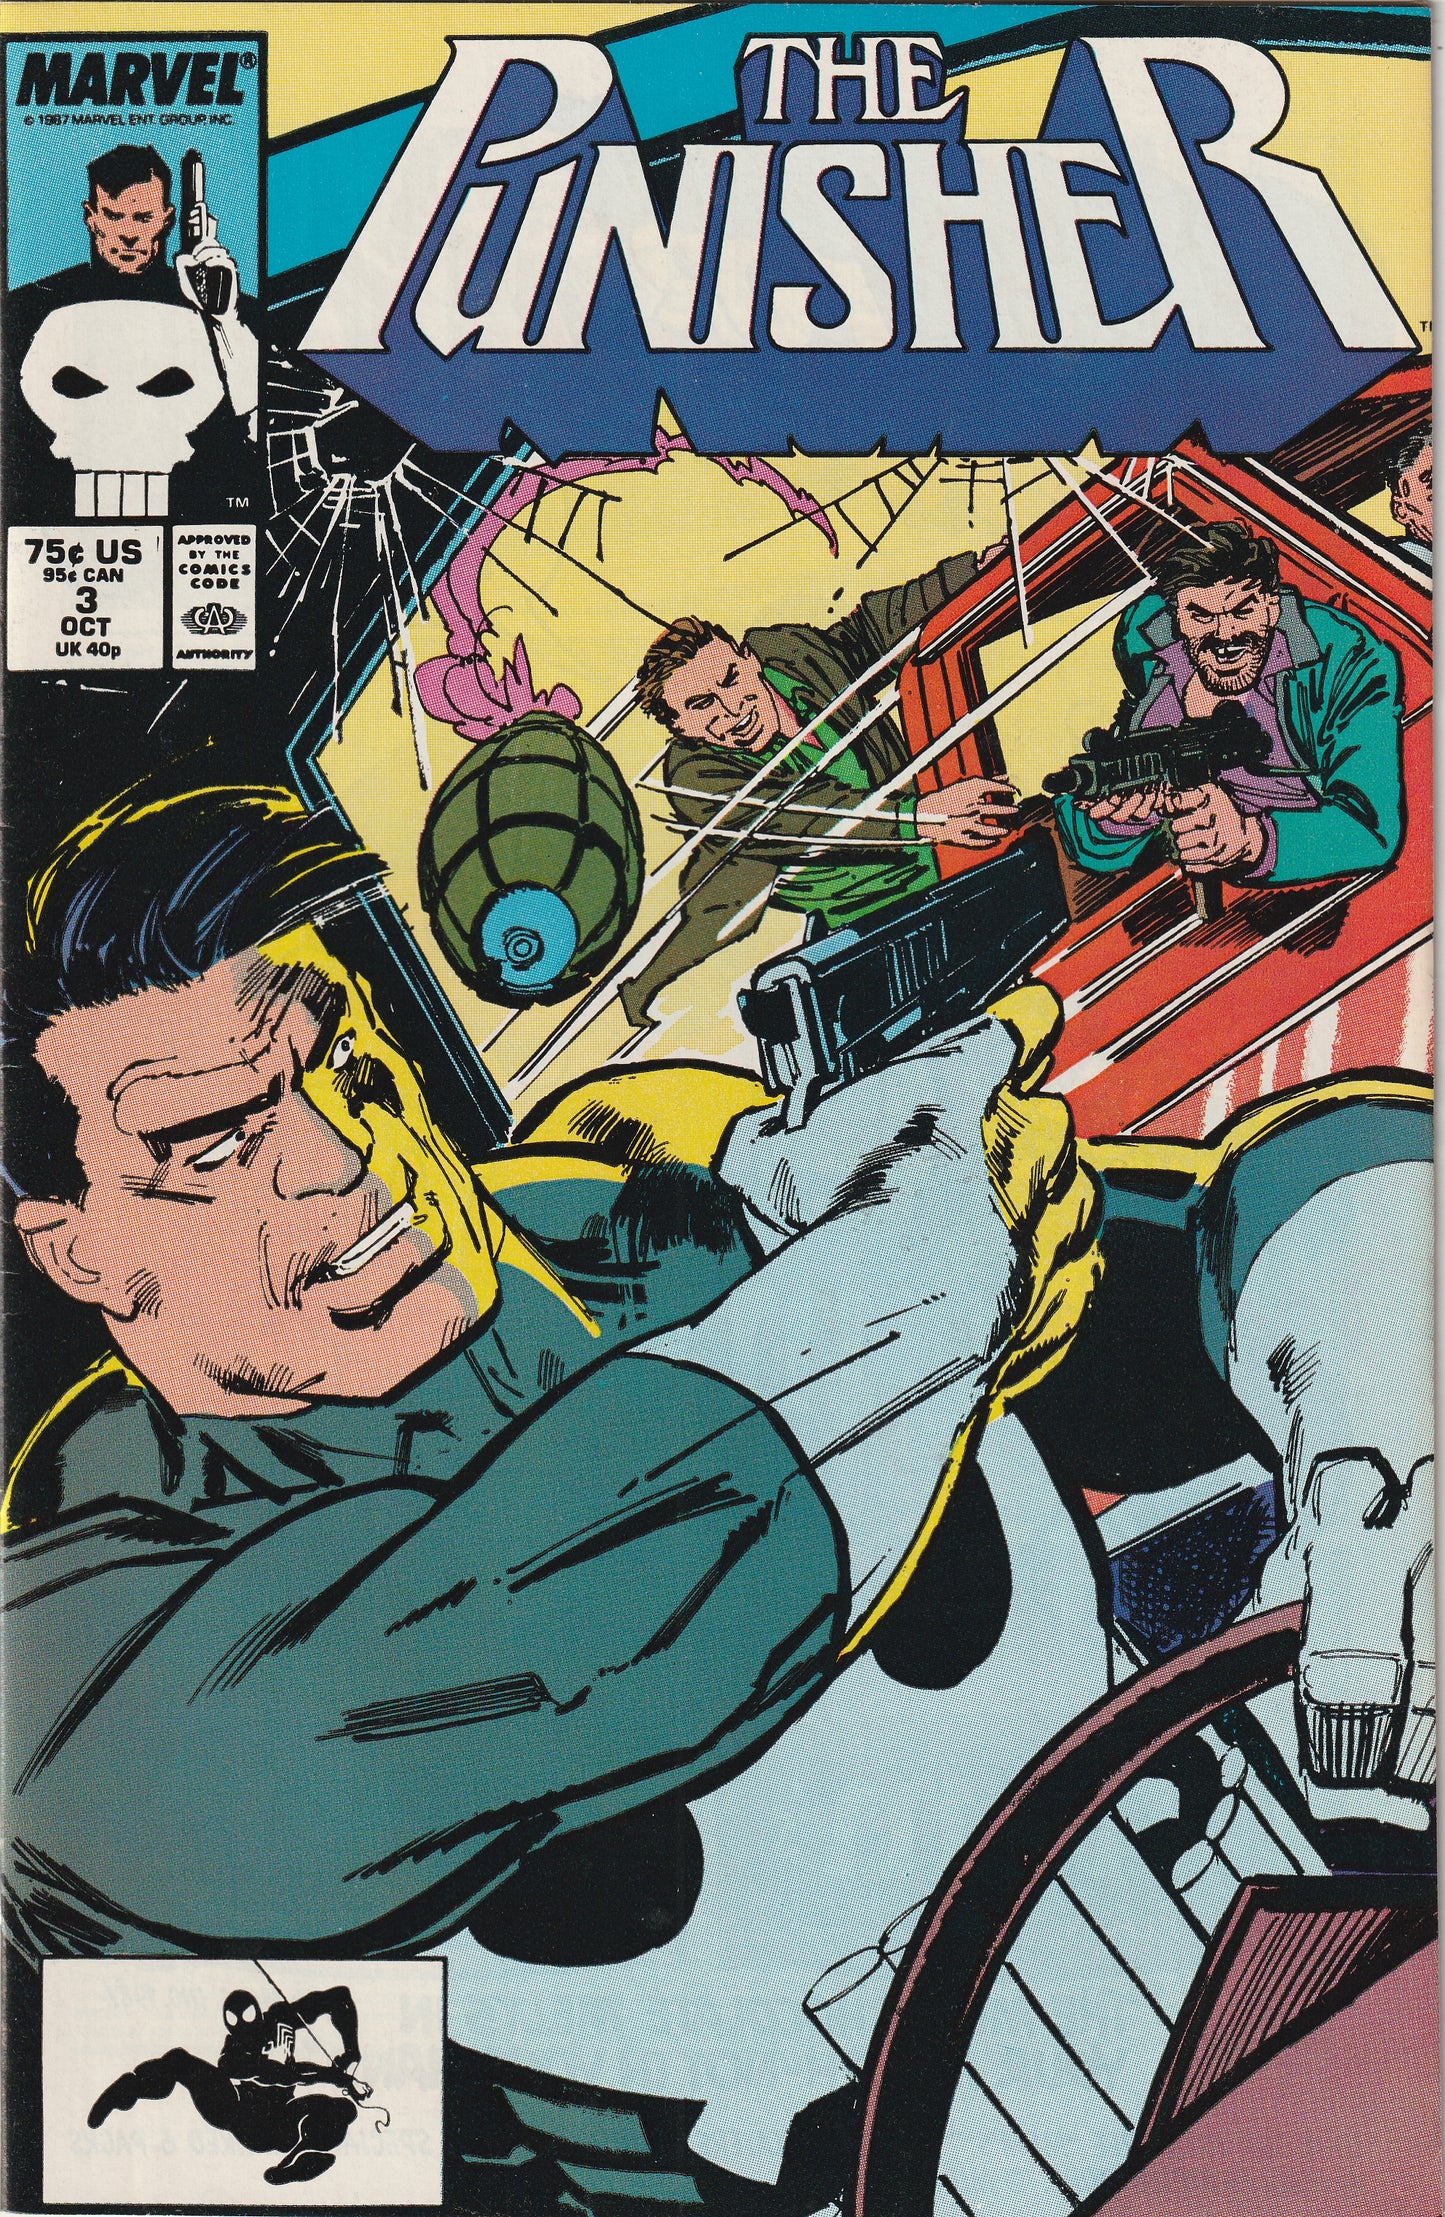 The Punisher #3 (1987)